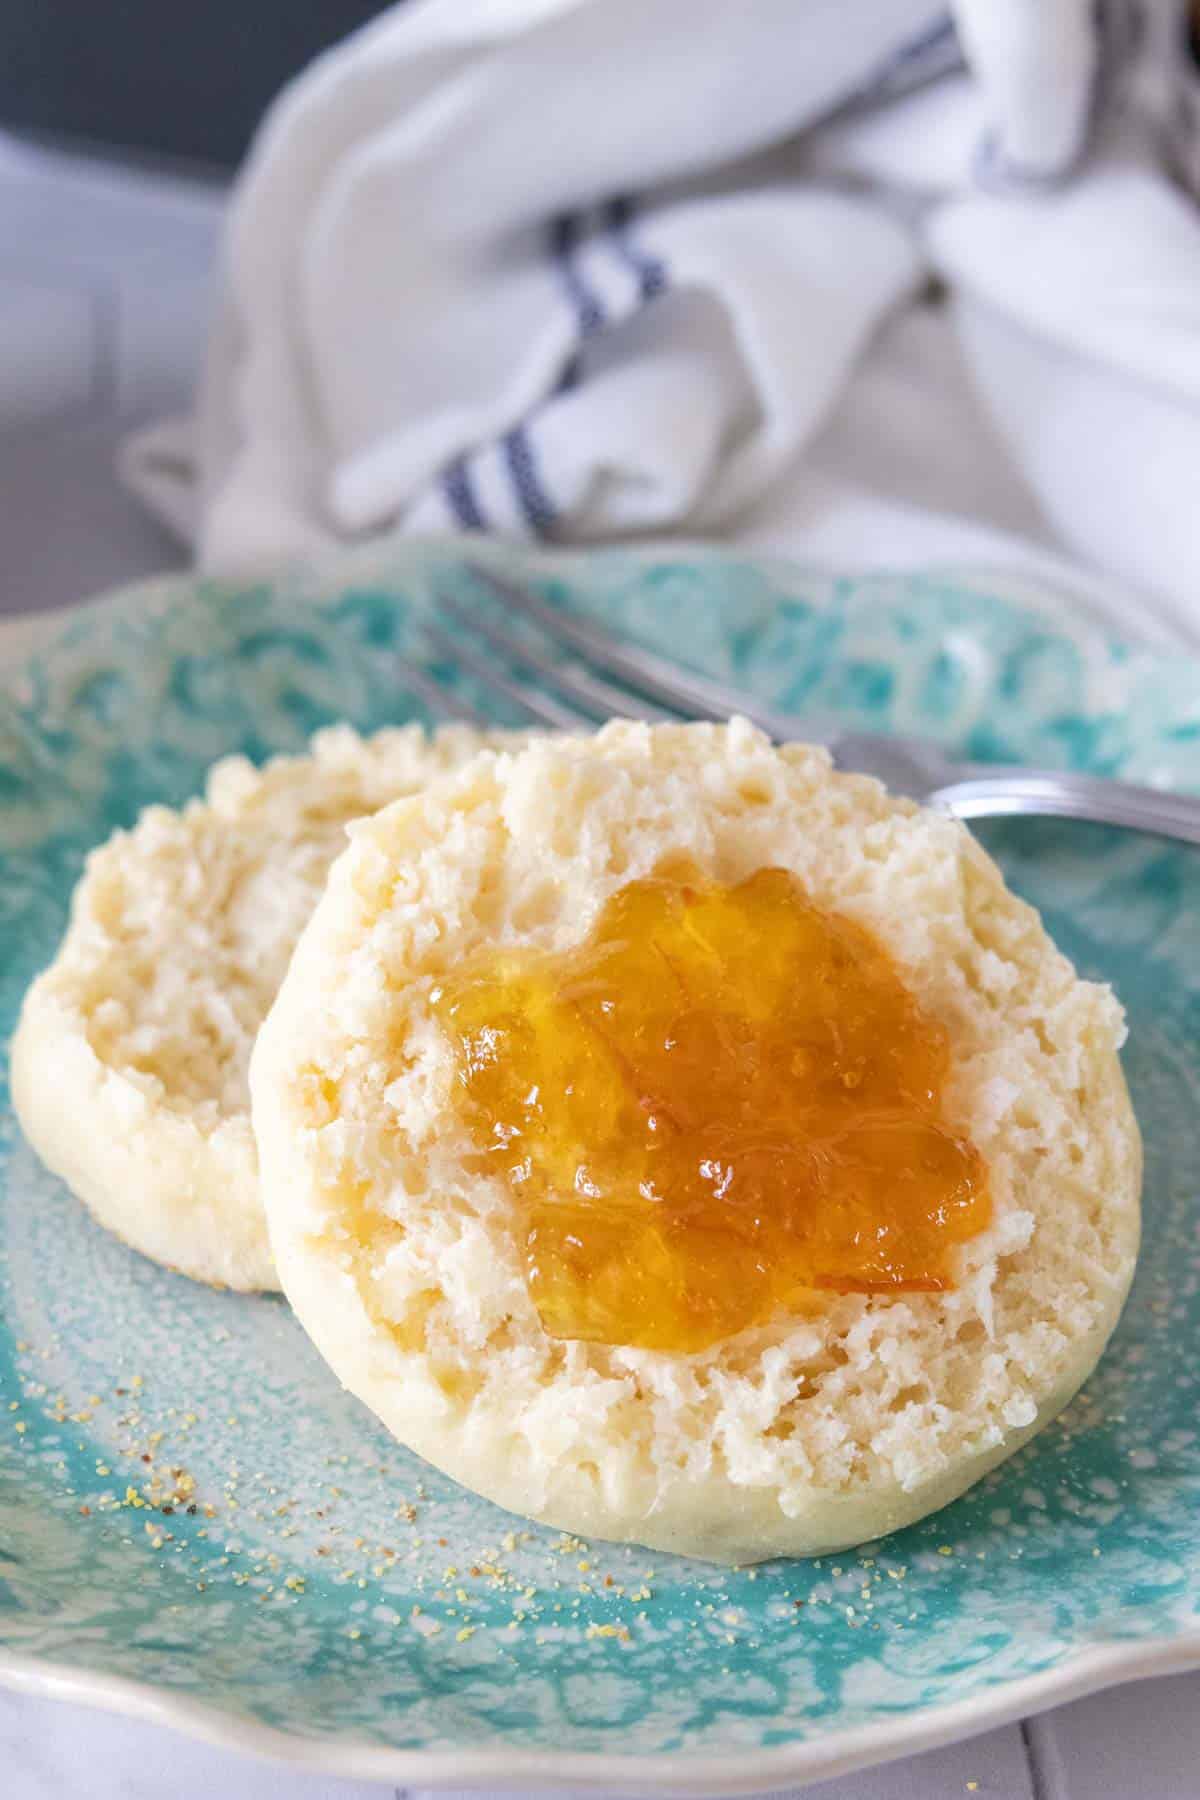 Close up of a split English muffin with marmalade on top.